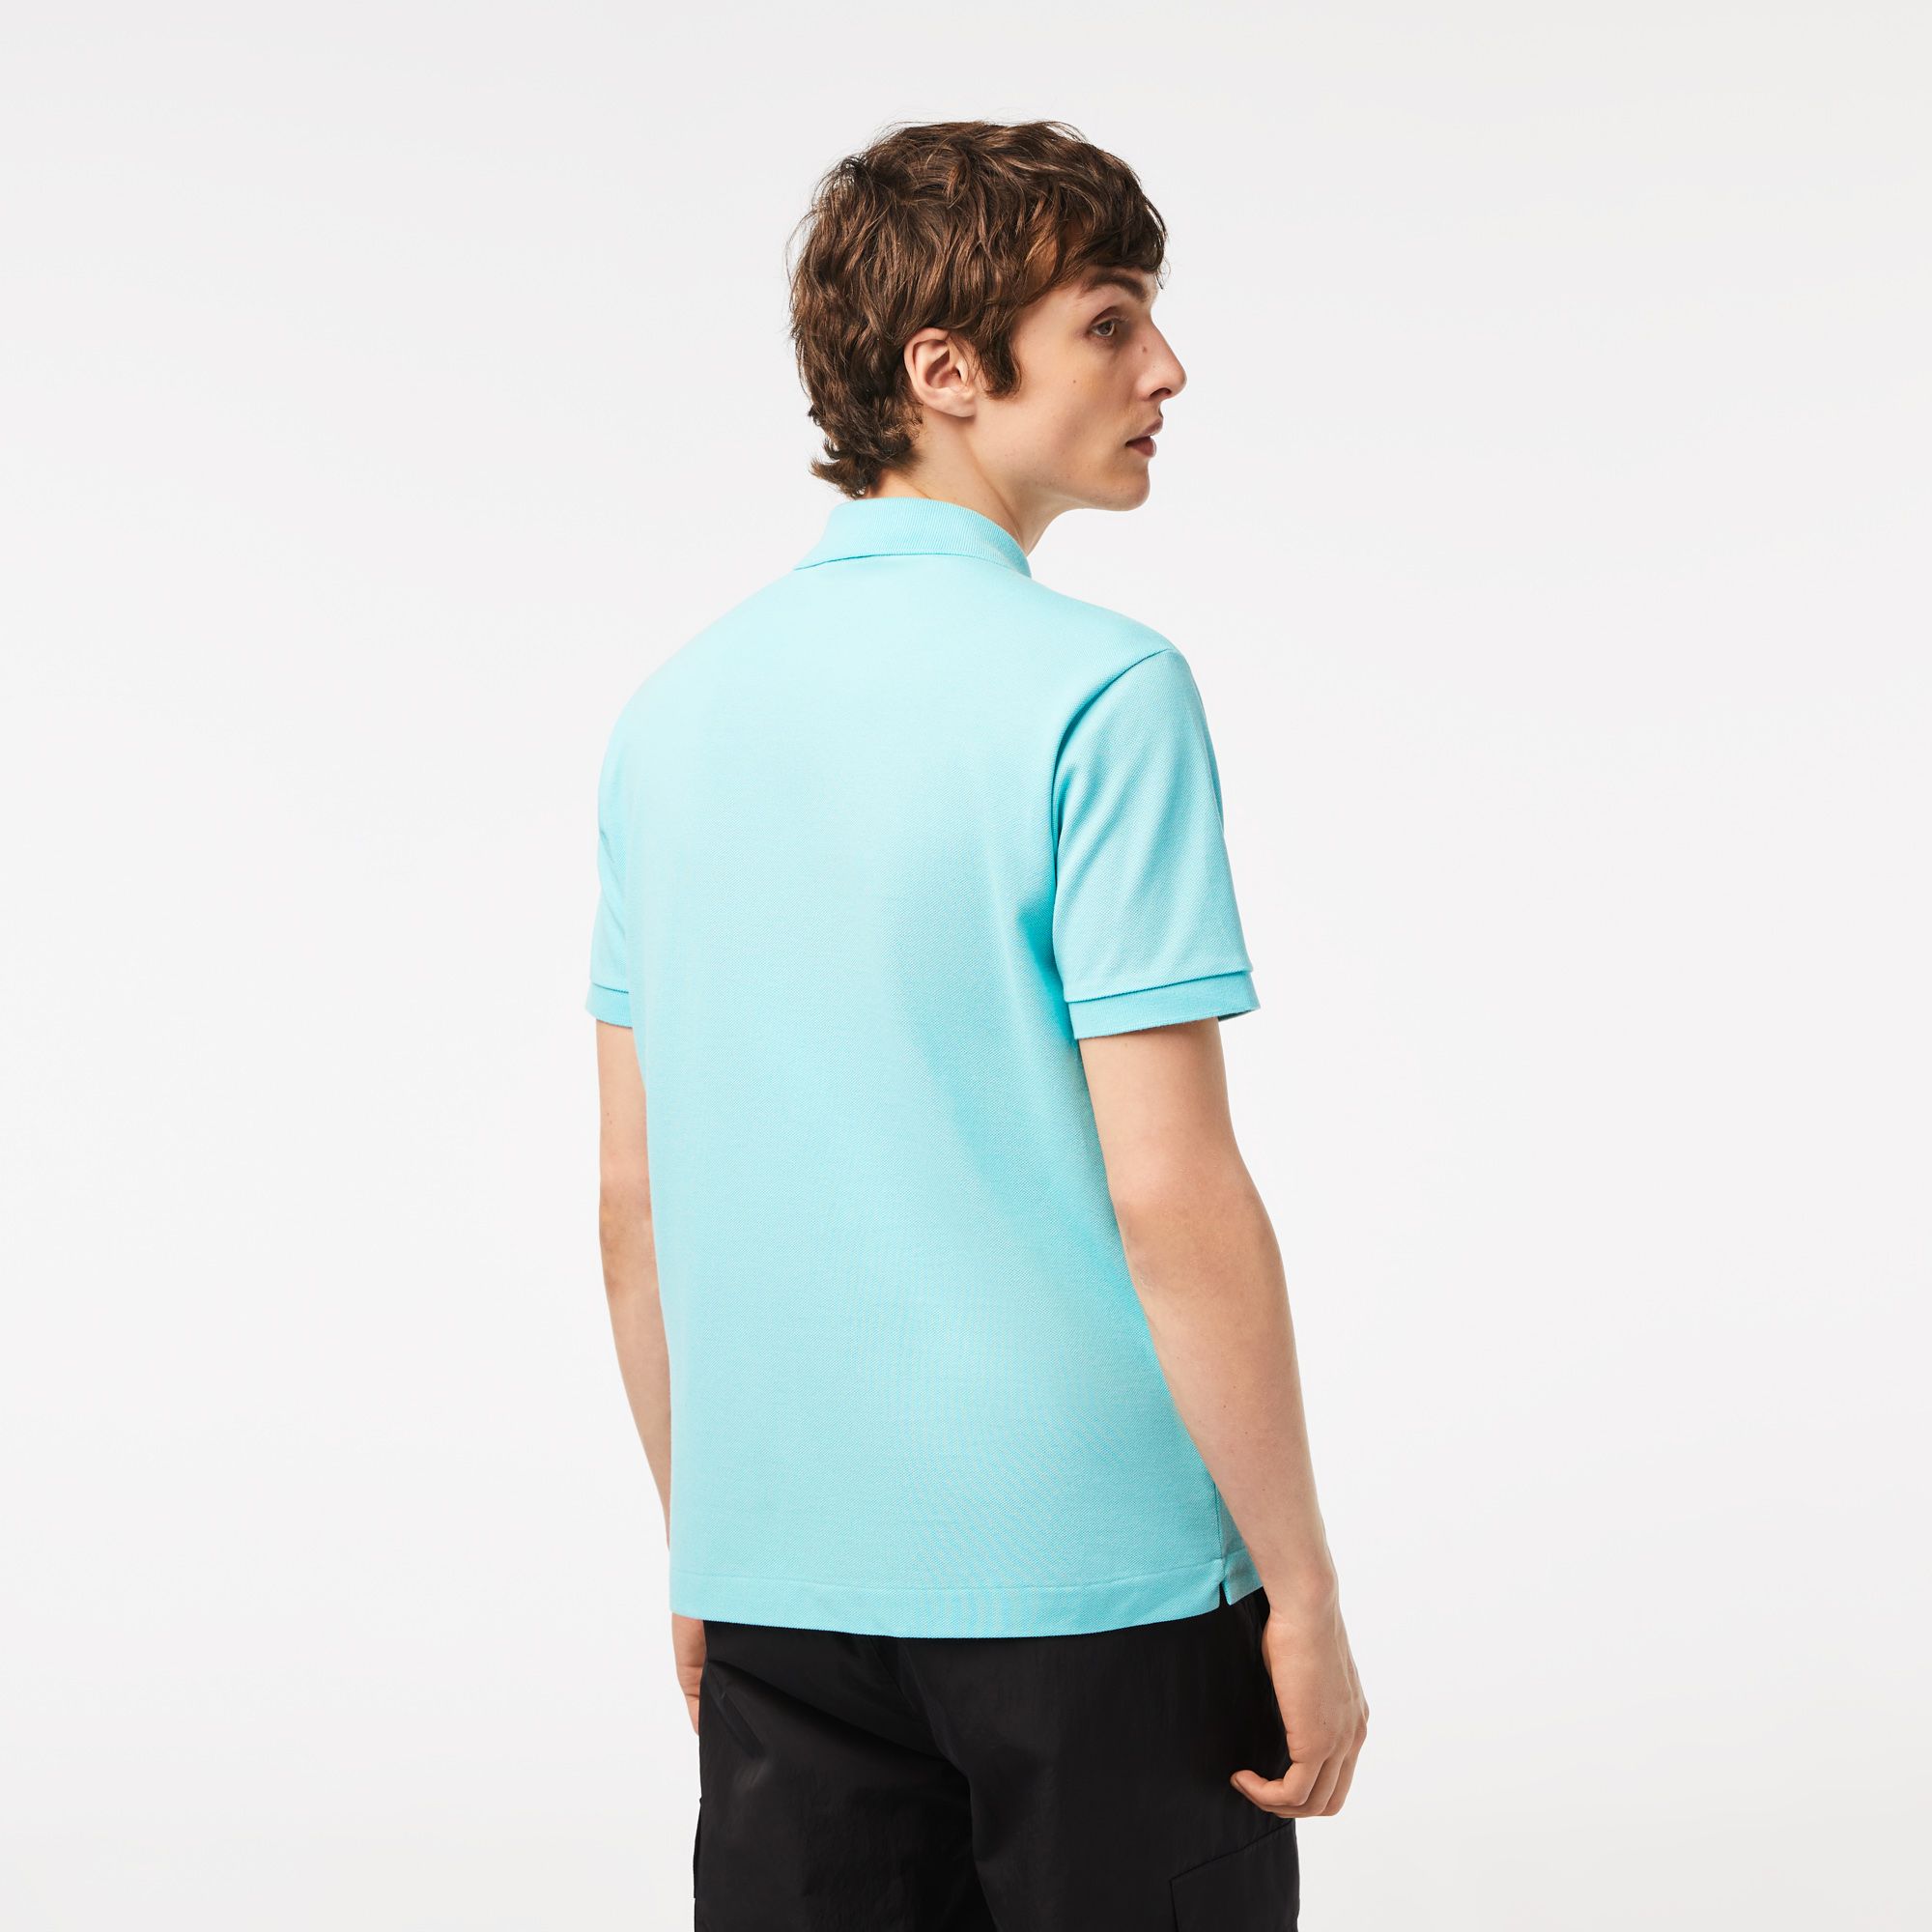  Lacoste Classic Fit L.12.12 Polo - Light Turquoise 